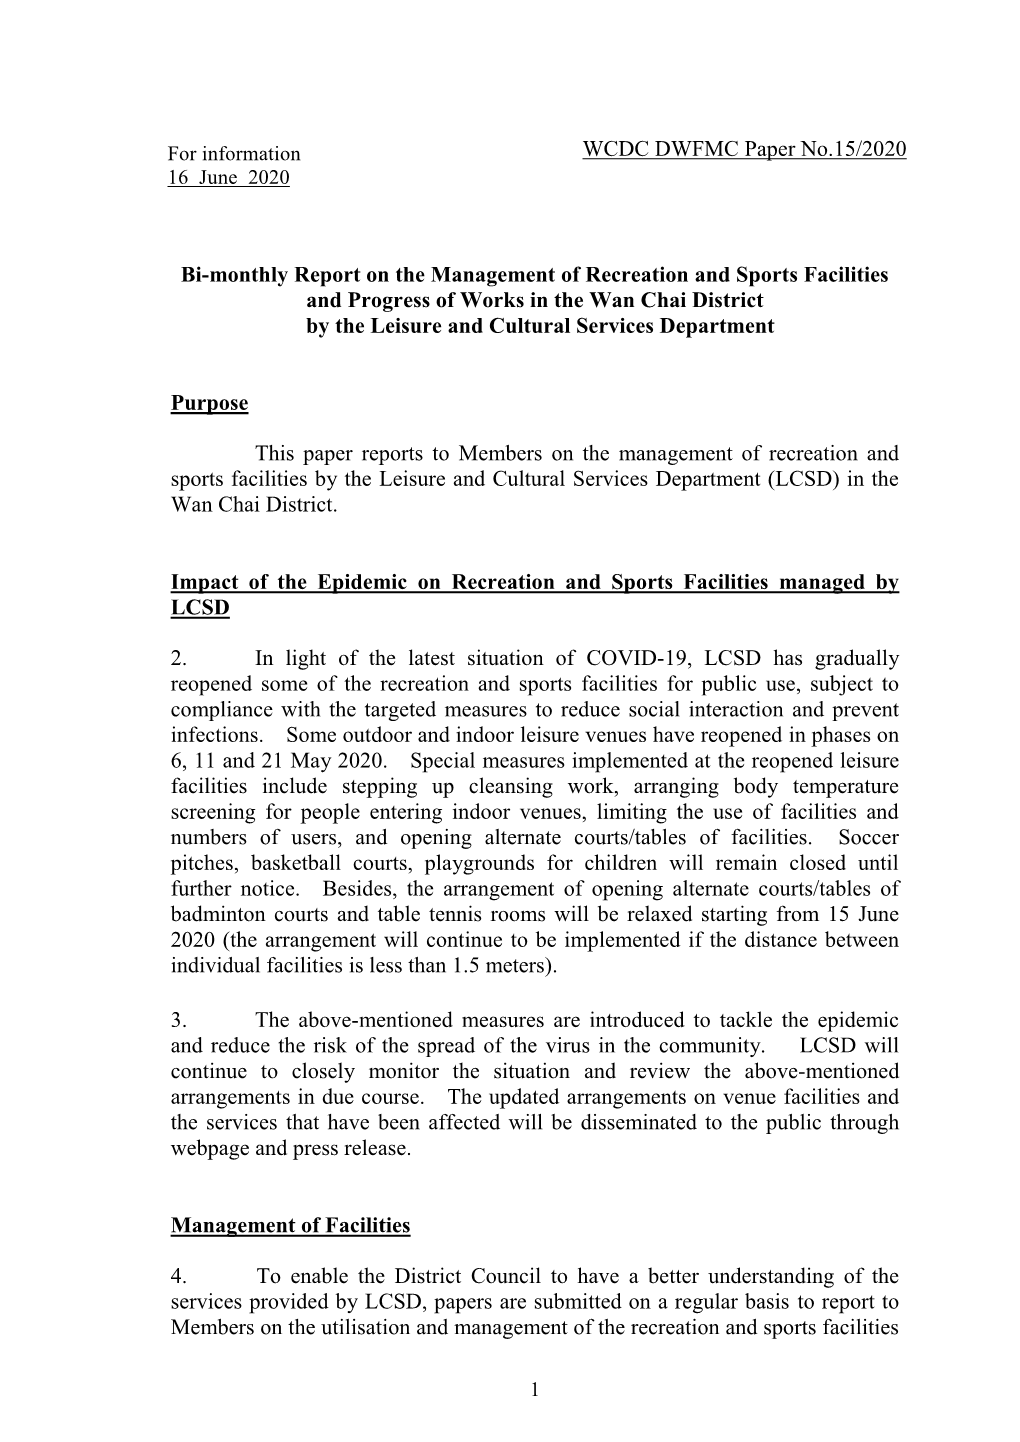 Bi-Monthly Report on the Management of Recreation And